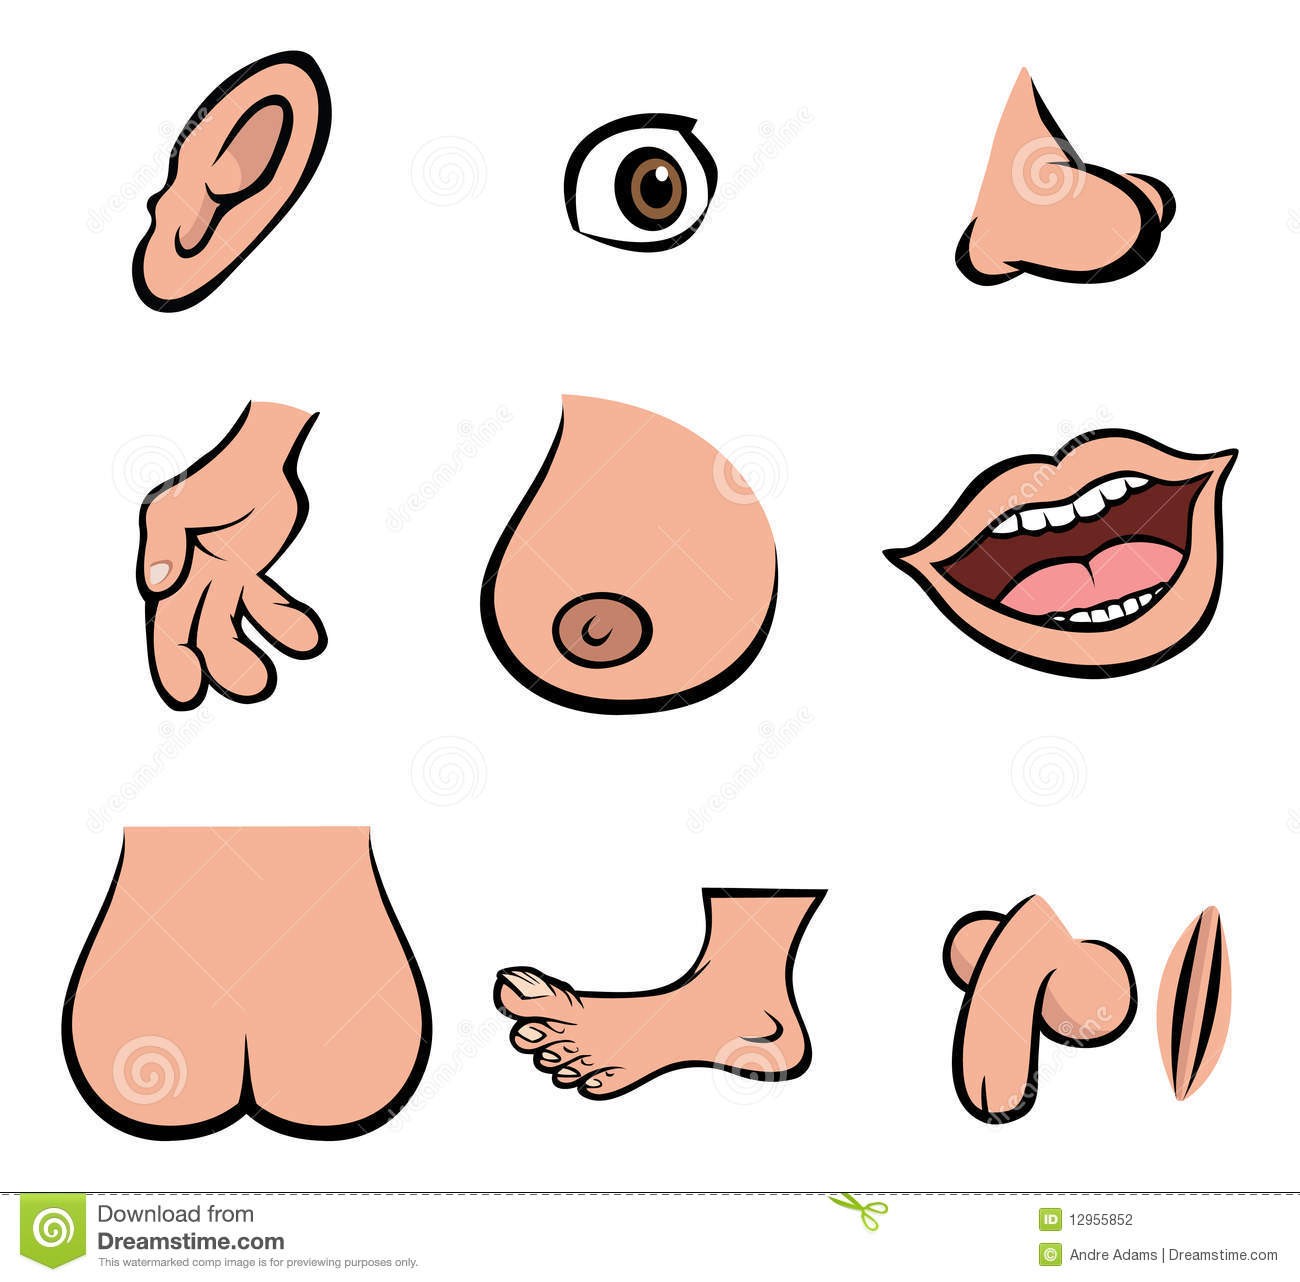 In Clipart Of External Body Parts Top 79 Clip Art Free Image.